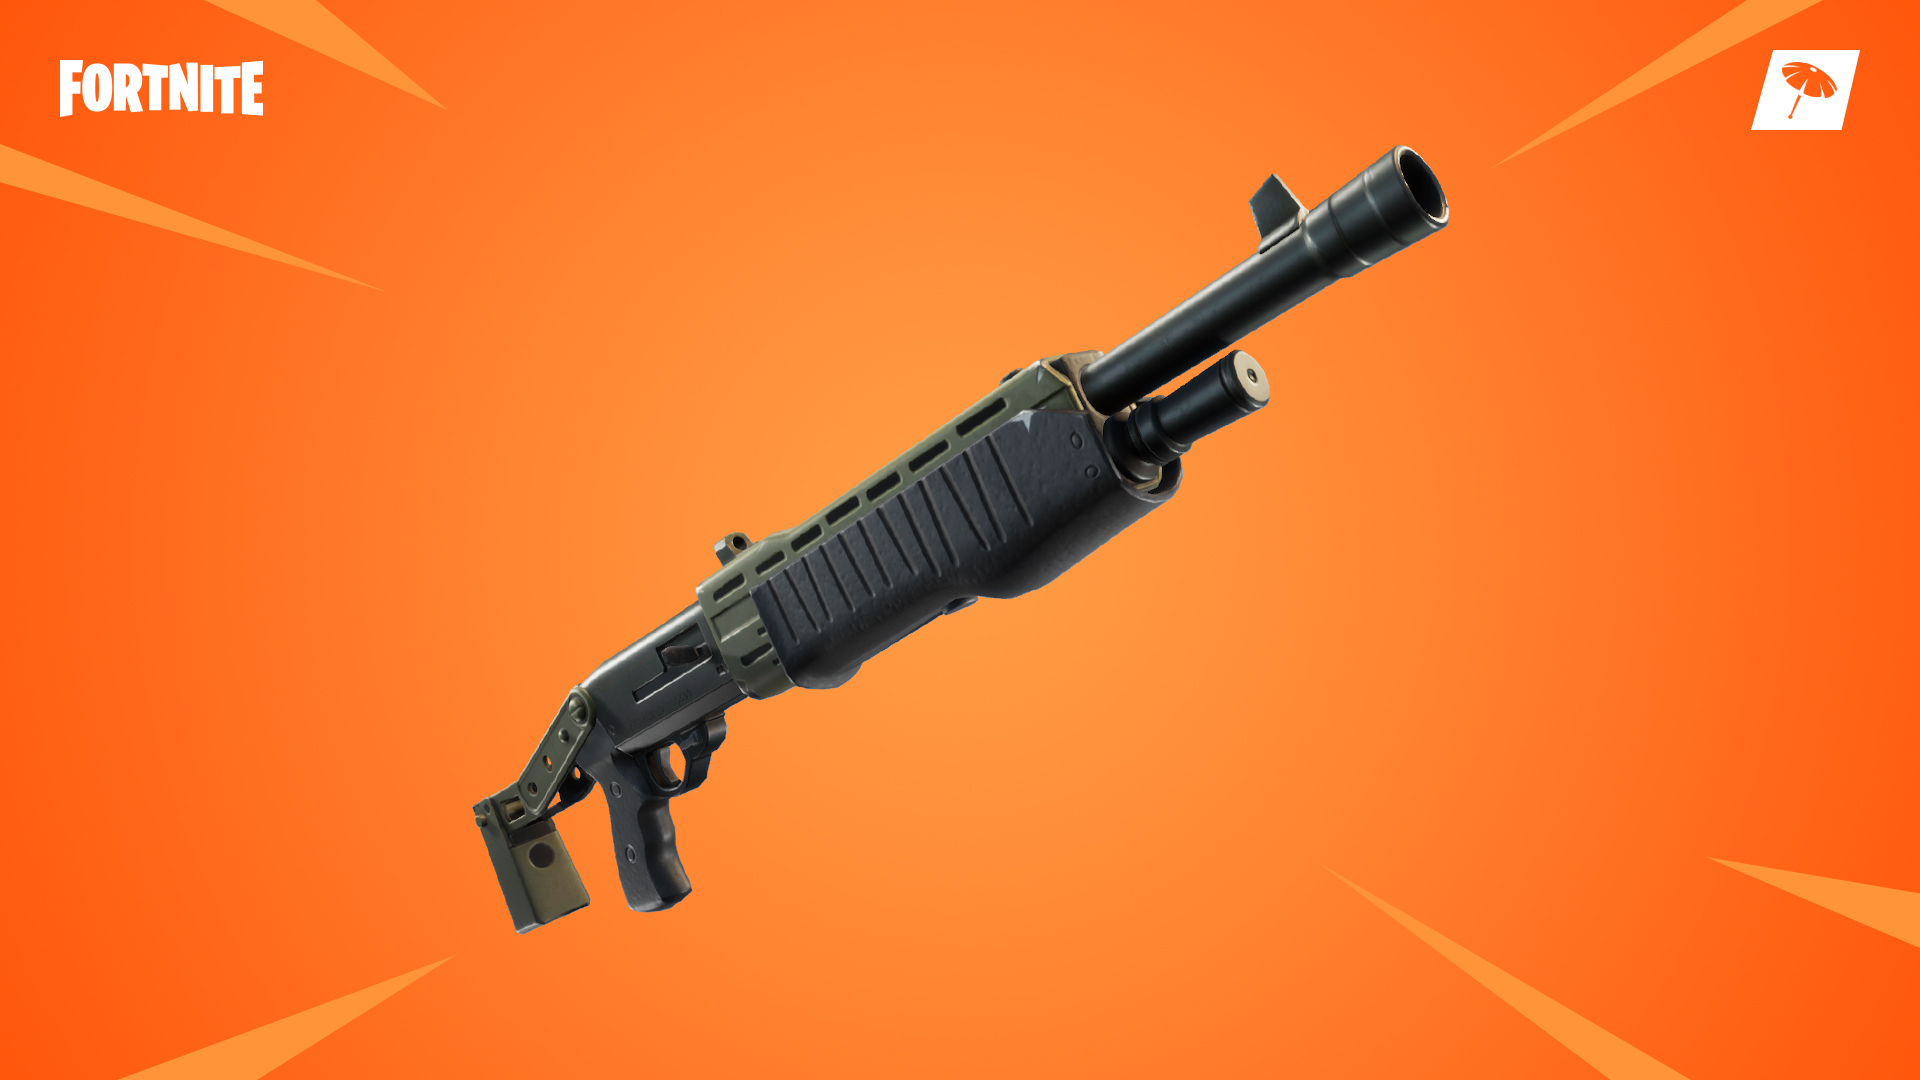 week 6 challenge of dealing damage with five different weapons is bugged in fortnite epic says - fortnite classes challenge